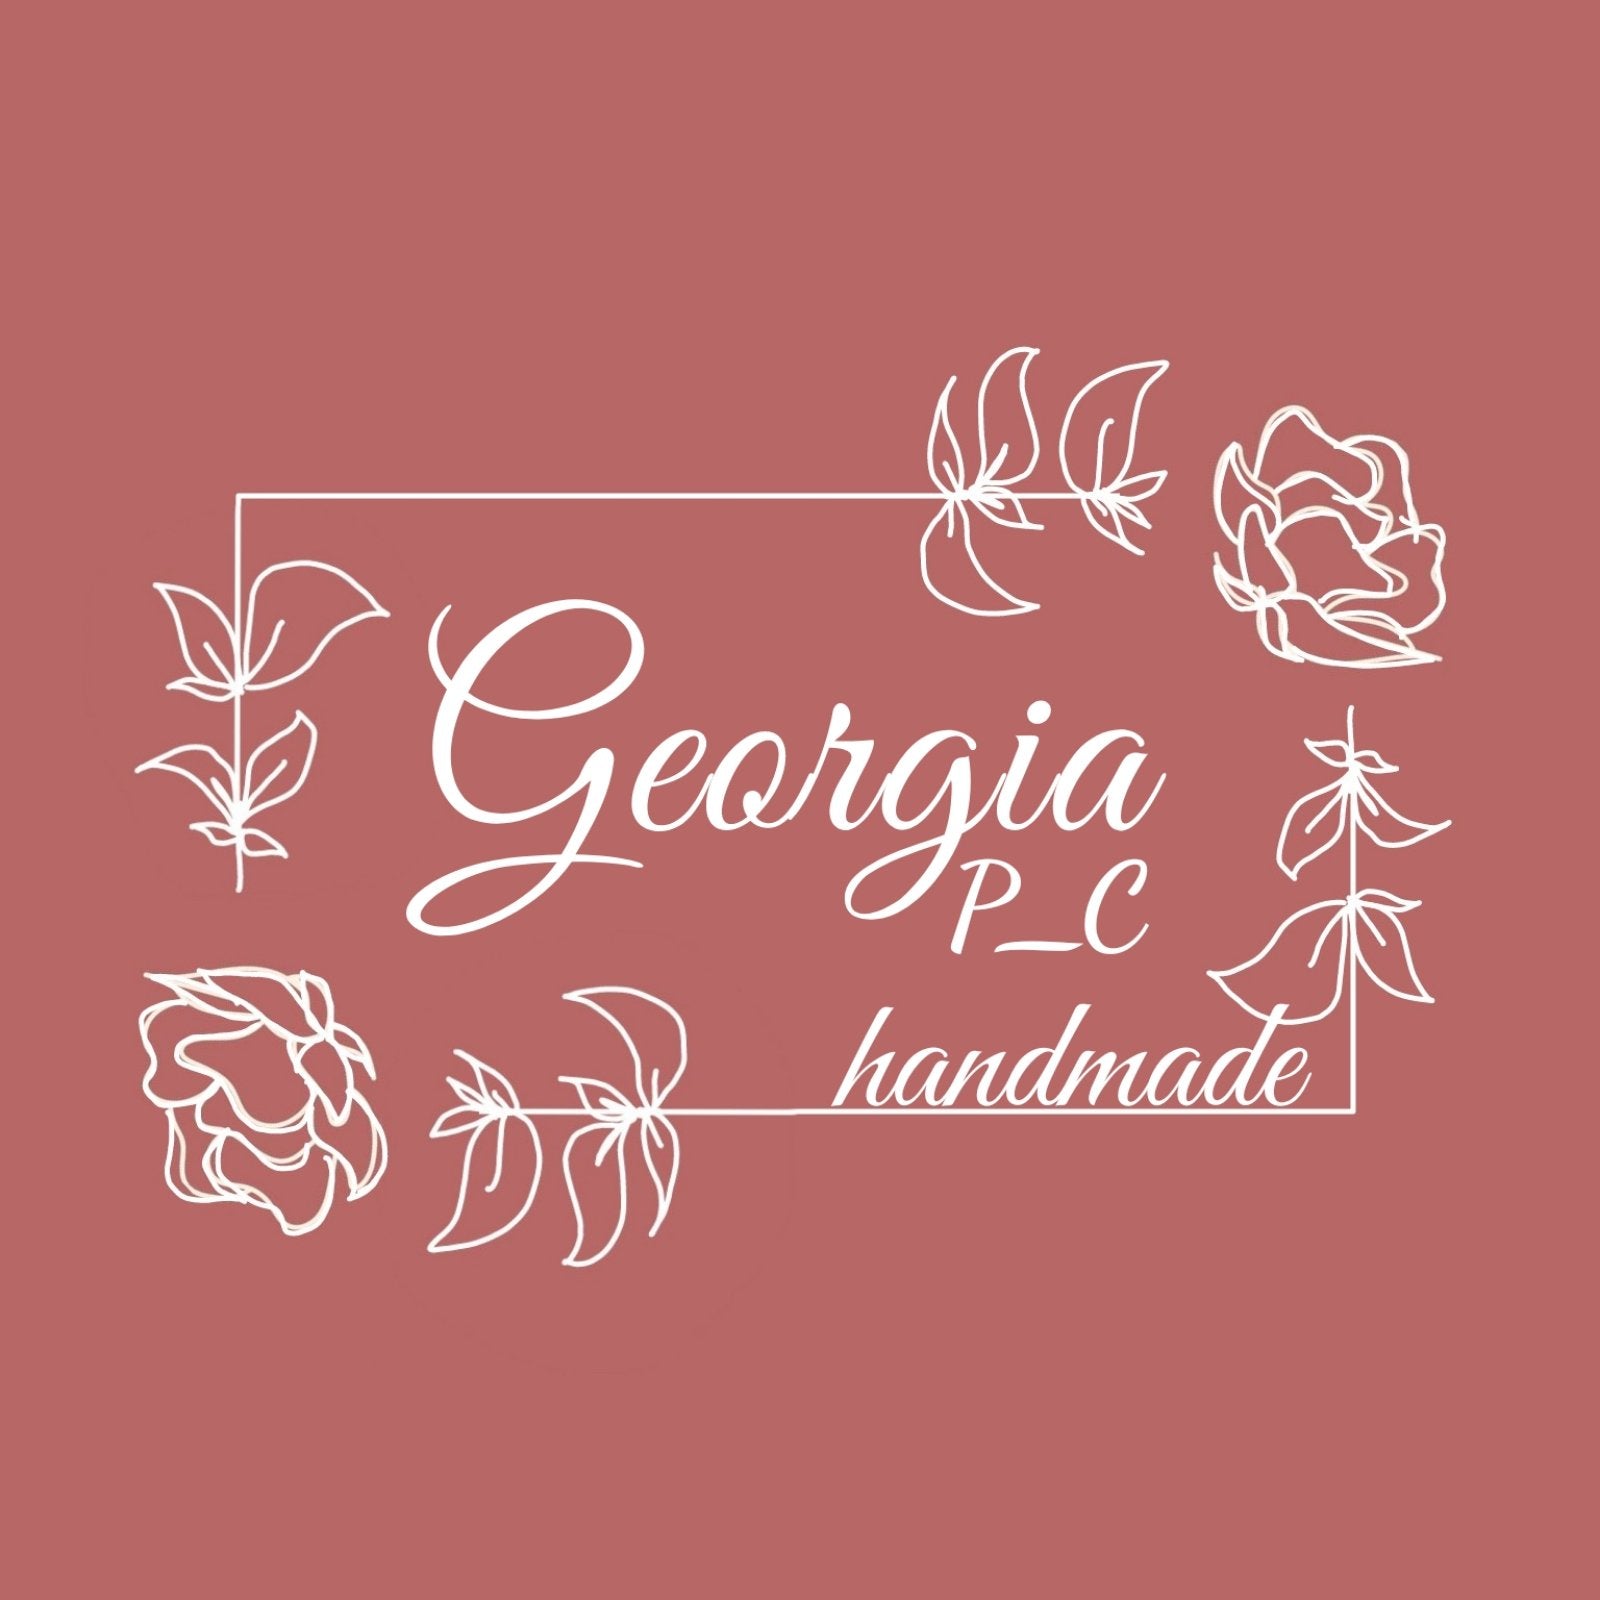 image of the logo: Georgia P_C handmade. The name is in the centre in a calligraphic font, it has a rectangle outline of flowers and leafs